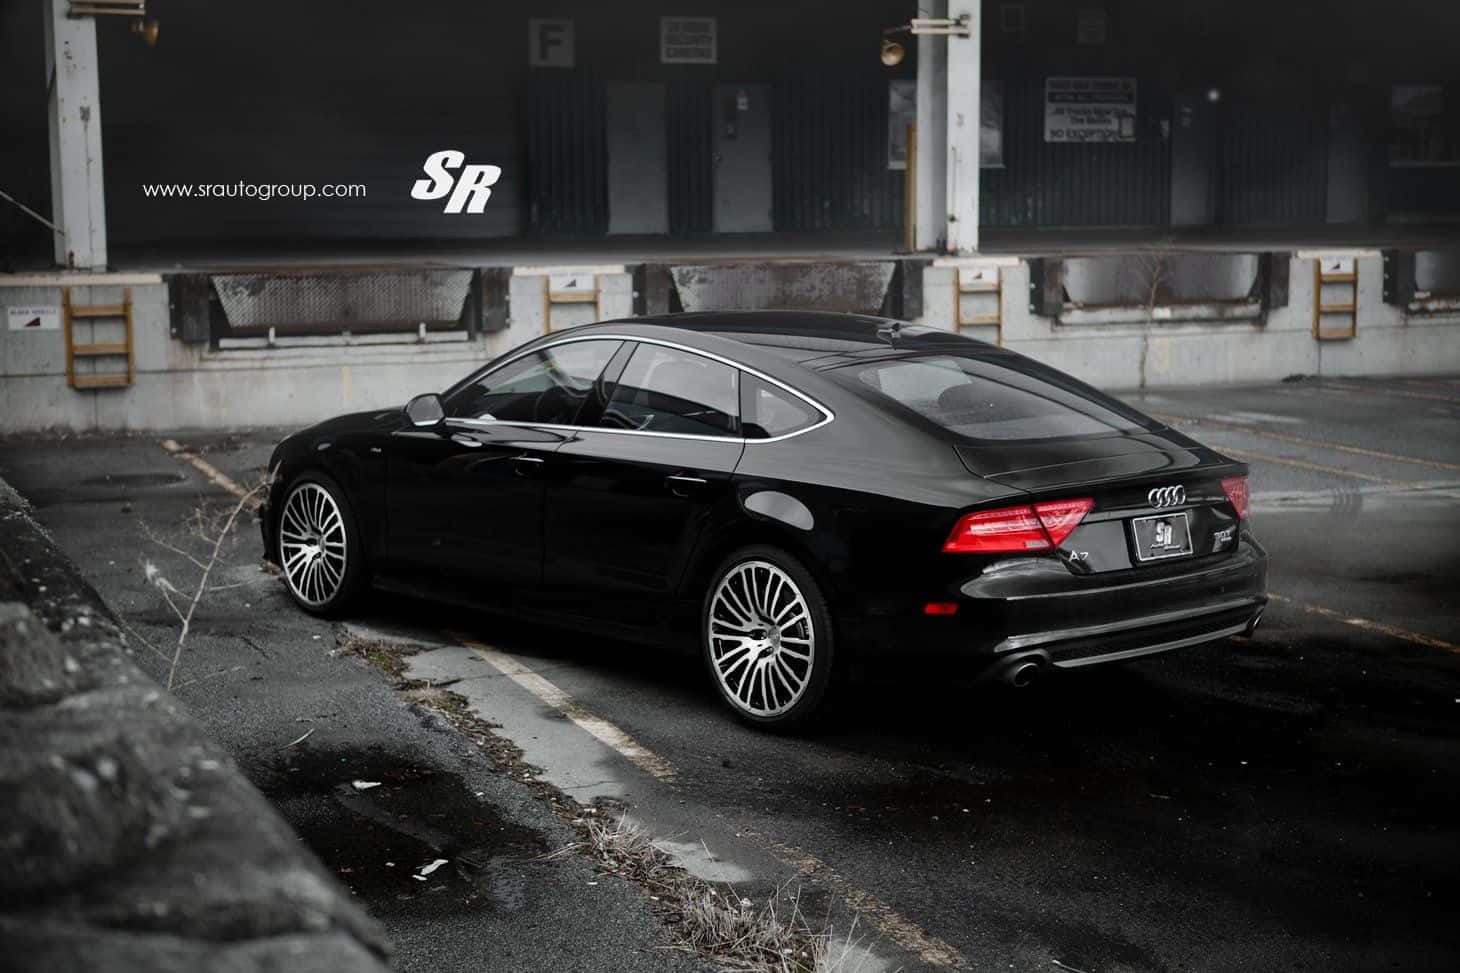 Captivating Audi S7 On The Road Wallpaper